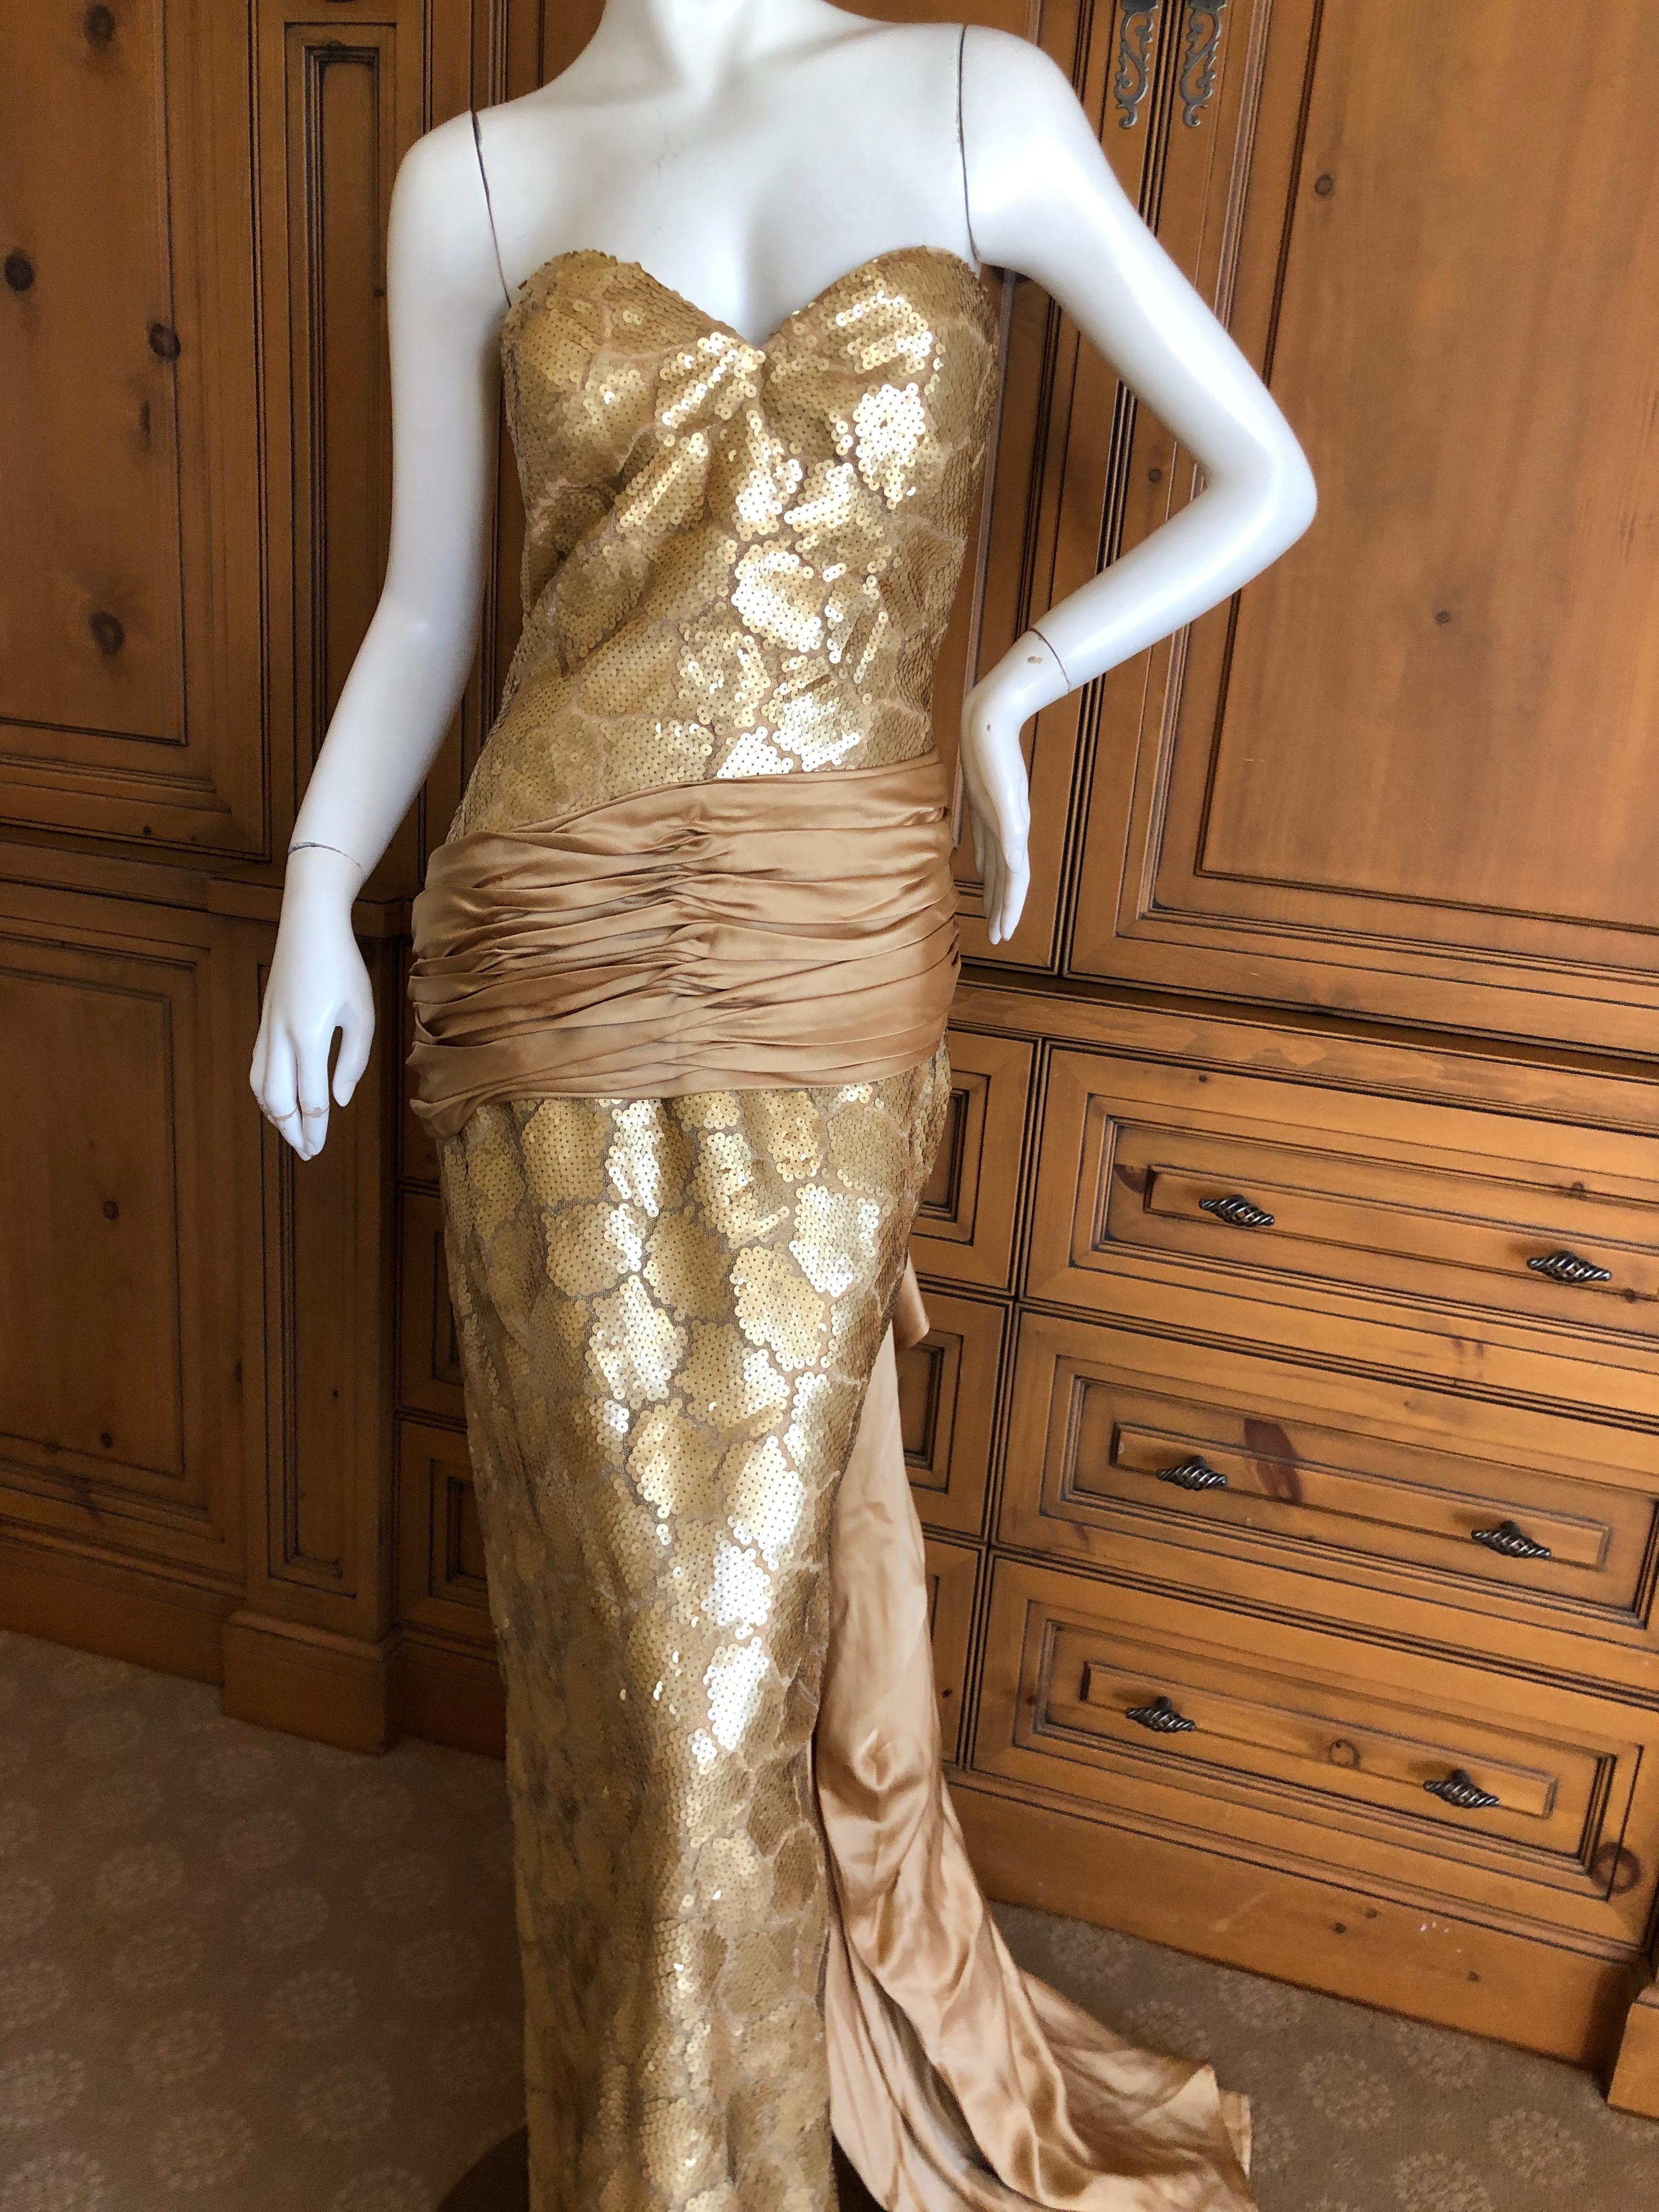 Women's Loris Azzaro Couture 1970s Sequin Accented Gold Dress with Waist Sash Train For Sale